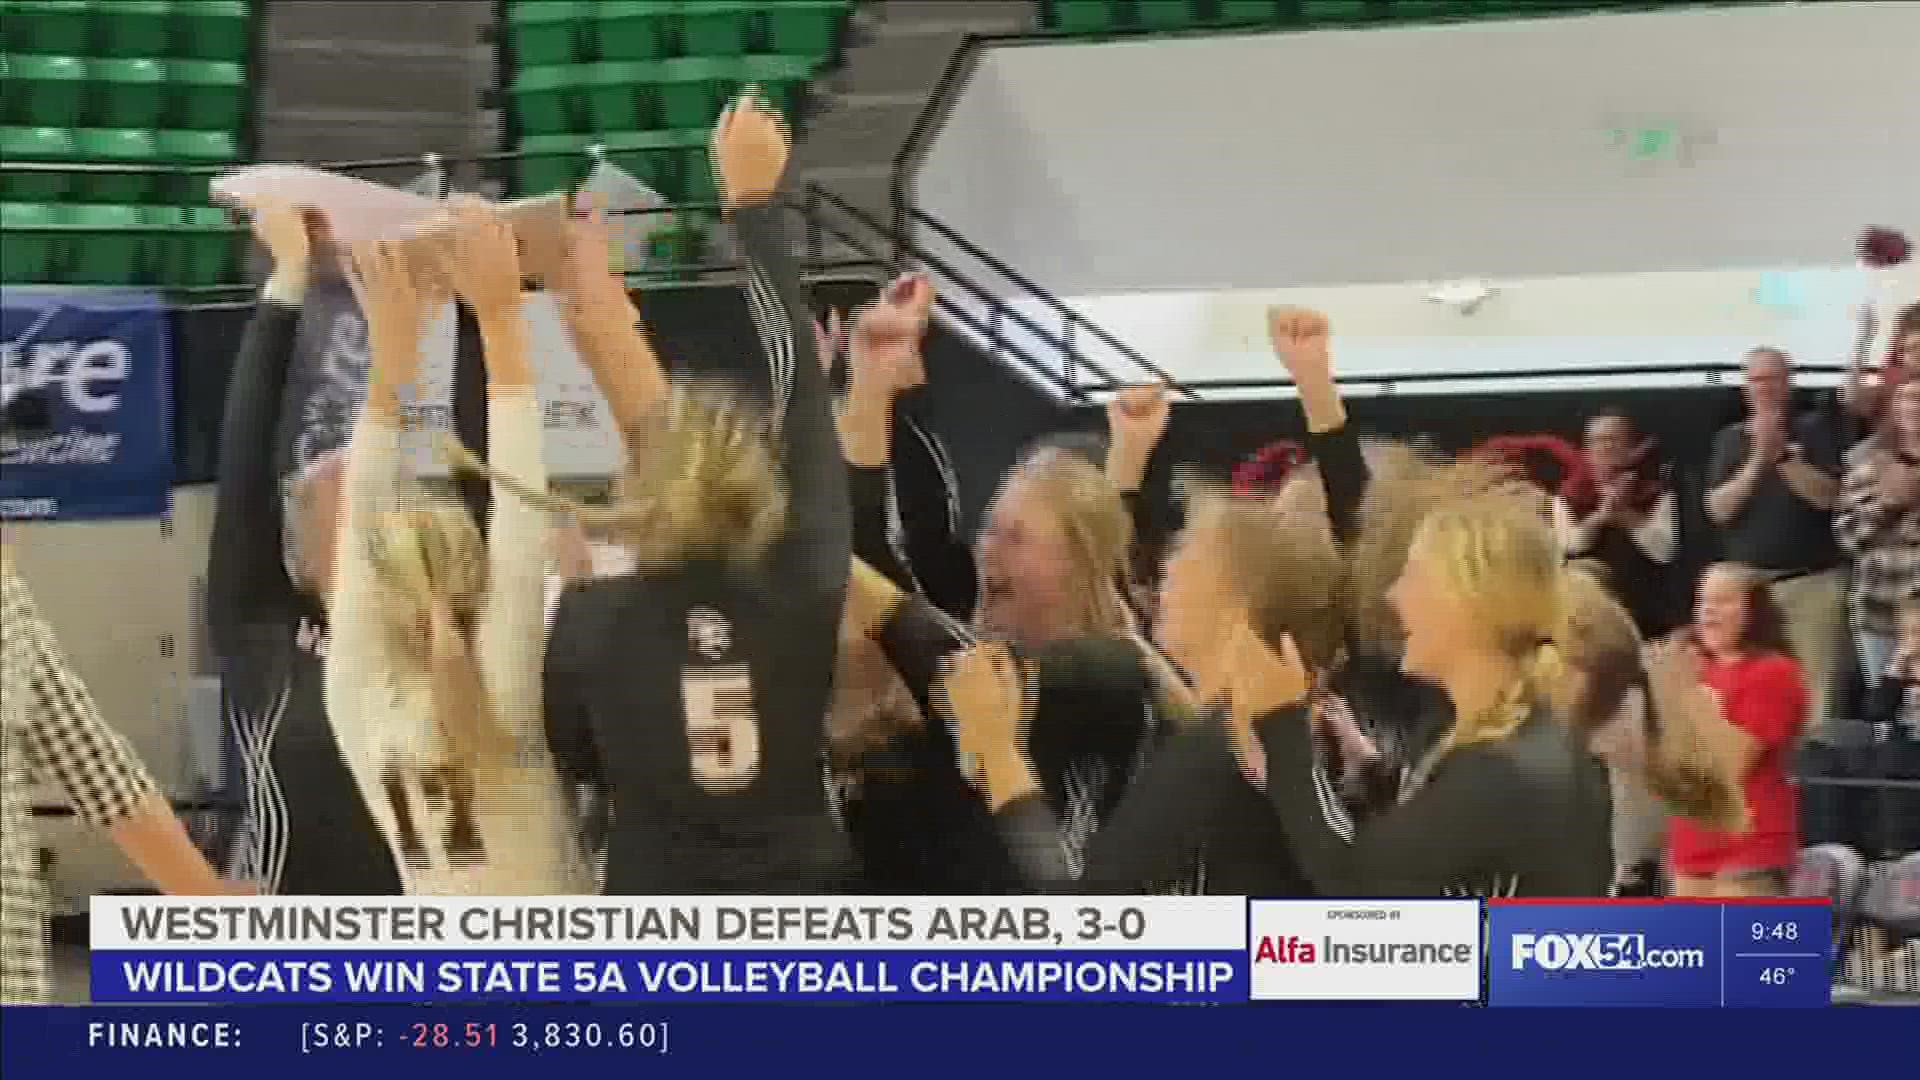 Senior Meg Paparella opened strong with six of her match-high 19 kills in the first set as Westminster Christian downed Arab 3-0 to win the Class 5A Championship